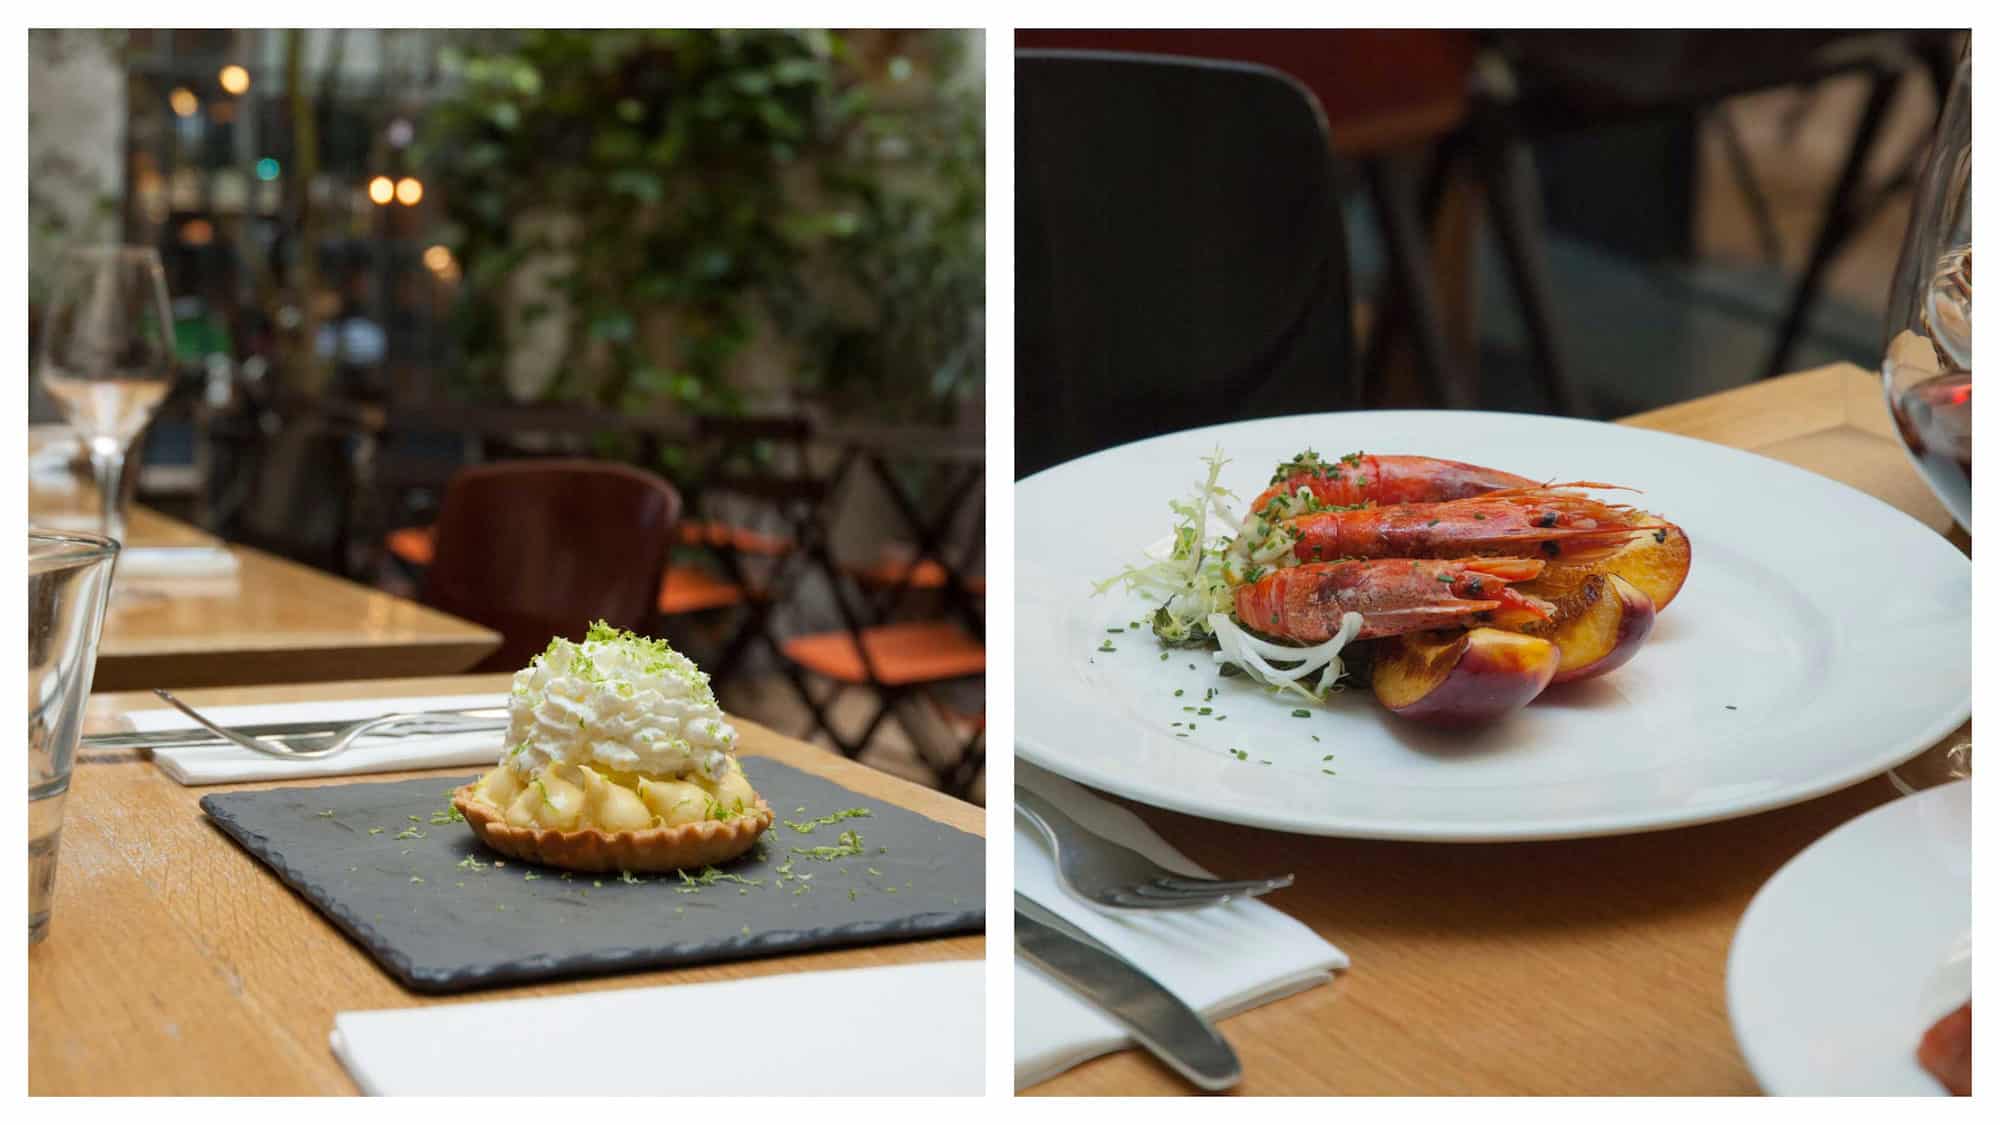 Tucked in the Marais in Paris, Jaja is one of the best places for modern French cuisine like Gambas with roast peaches (right) and lemon tart (left).